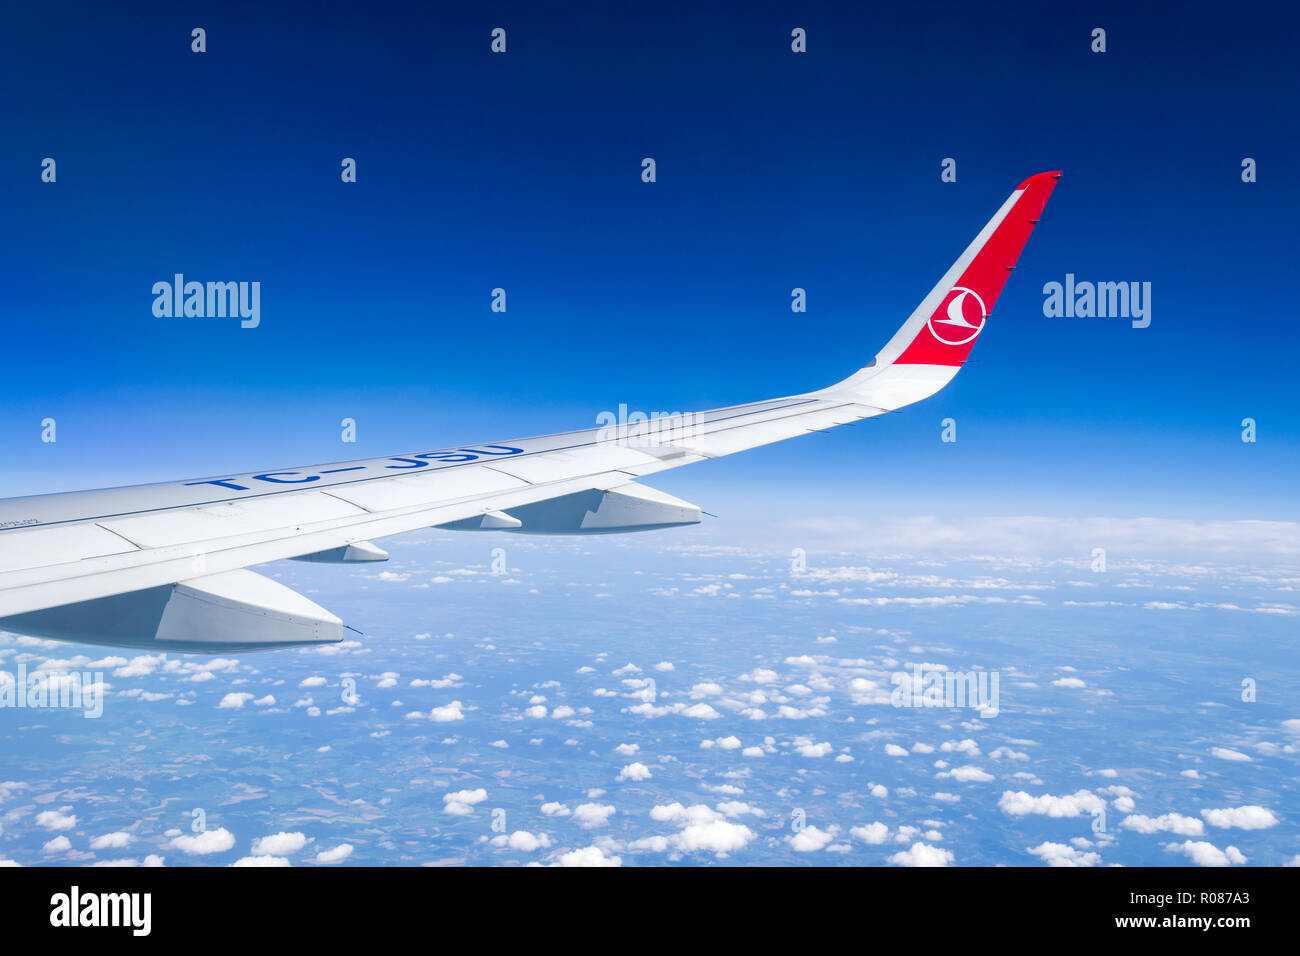 Interior Cabin View Of A Turkish Airlines Airbus A321 Wing